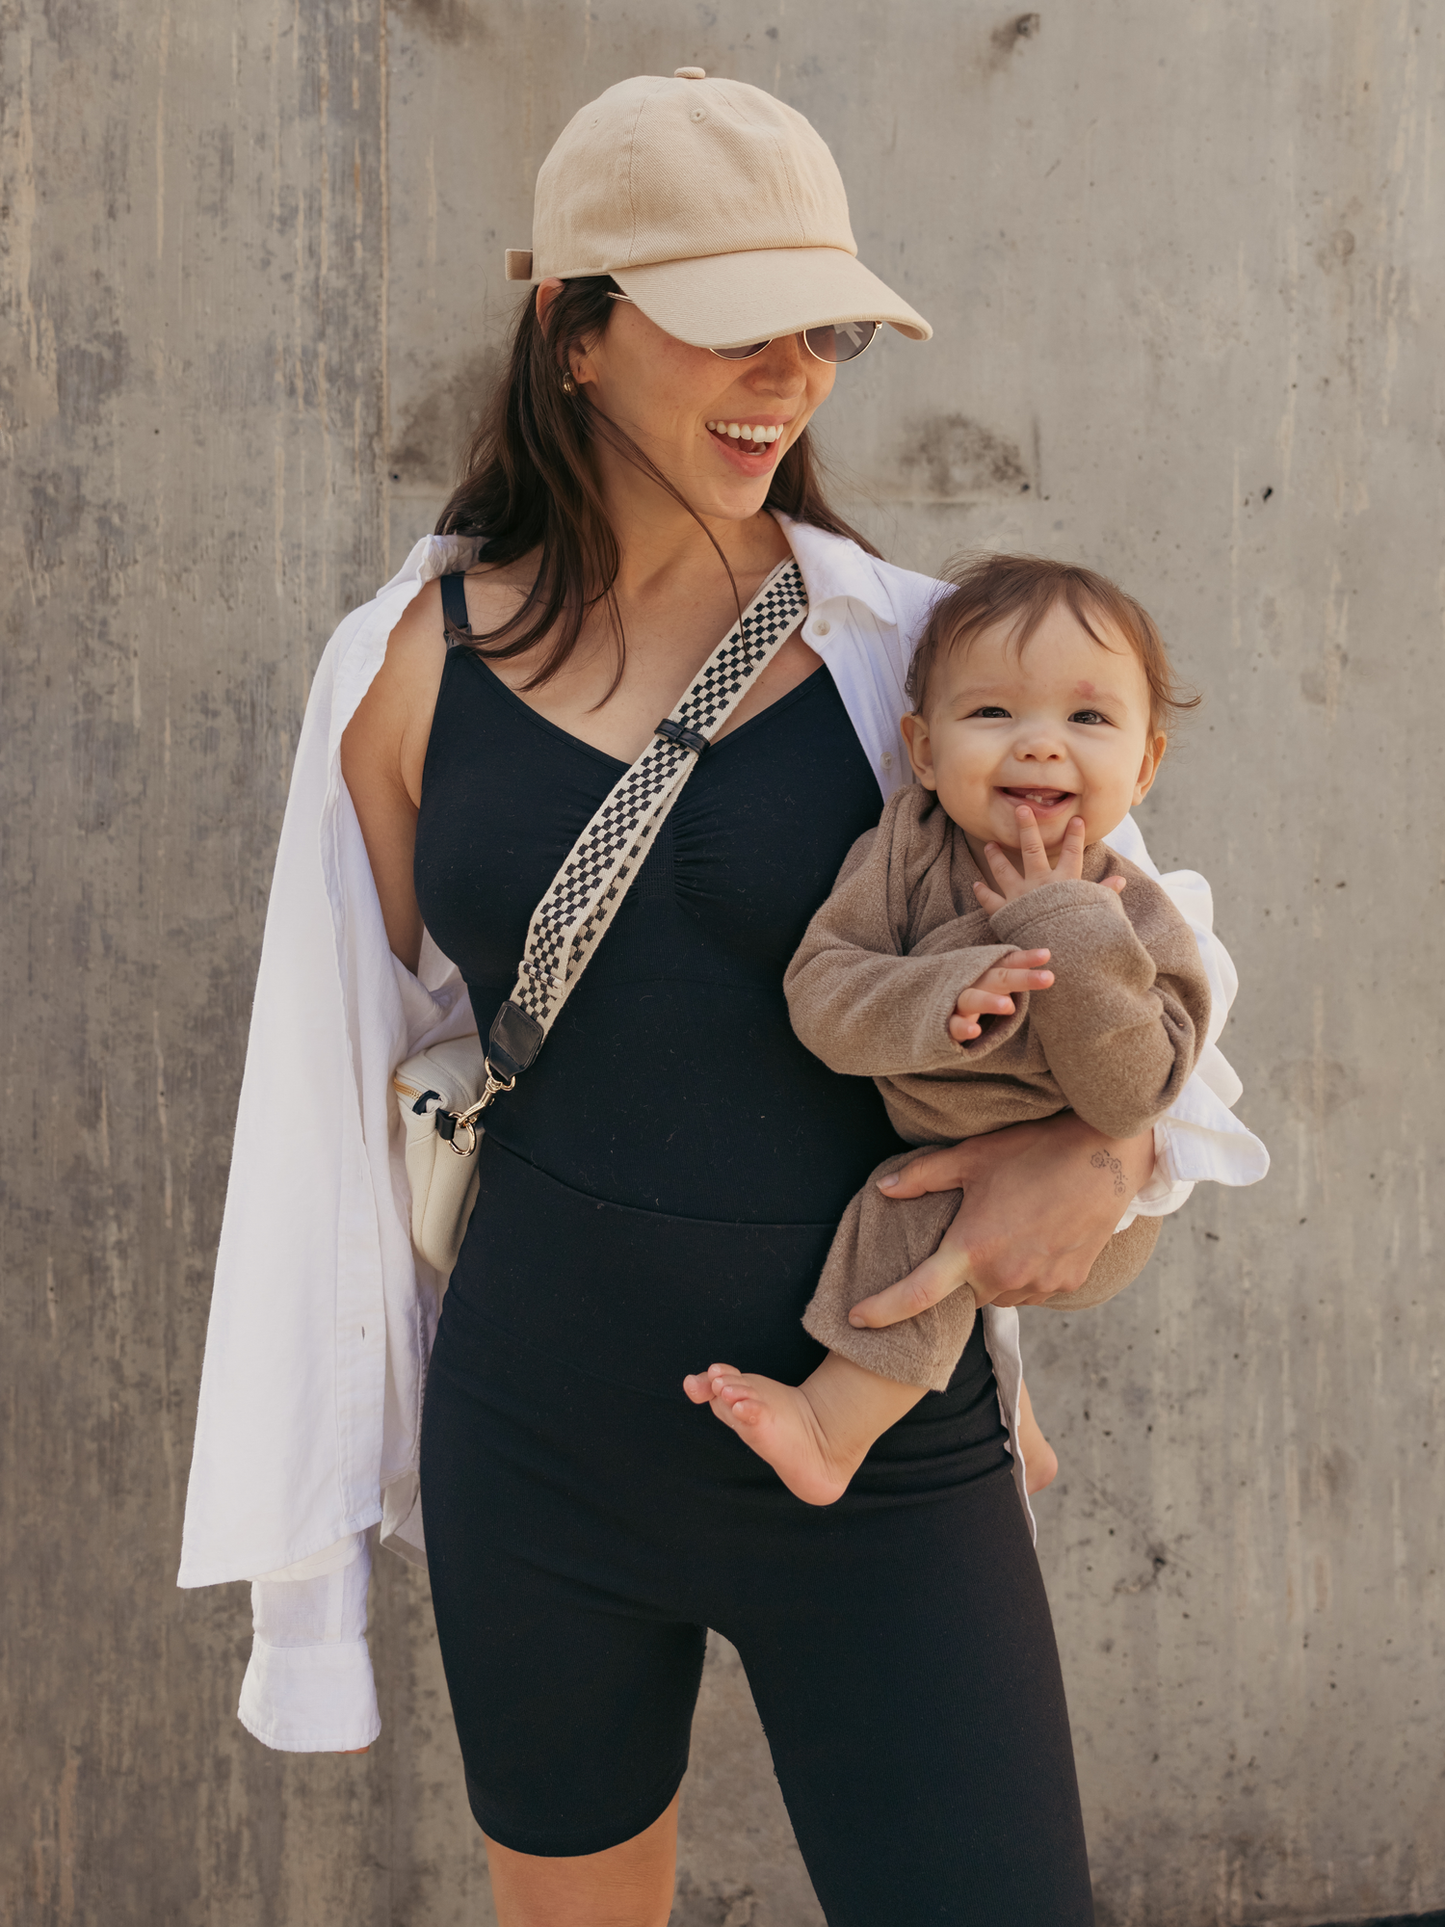 Model outside holding baby and wearing the Sublime®️ Bamboo Maternity & Nursing Bodysuit, paired with the Sublime® Bamboo Maternity & Postpartum Bike Short in black and an open button-down shirt..